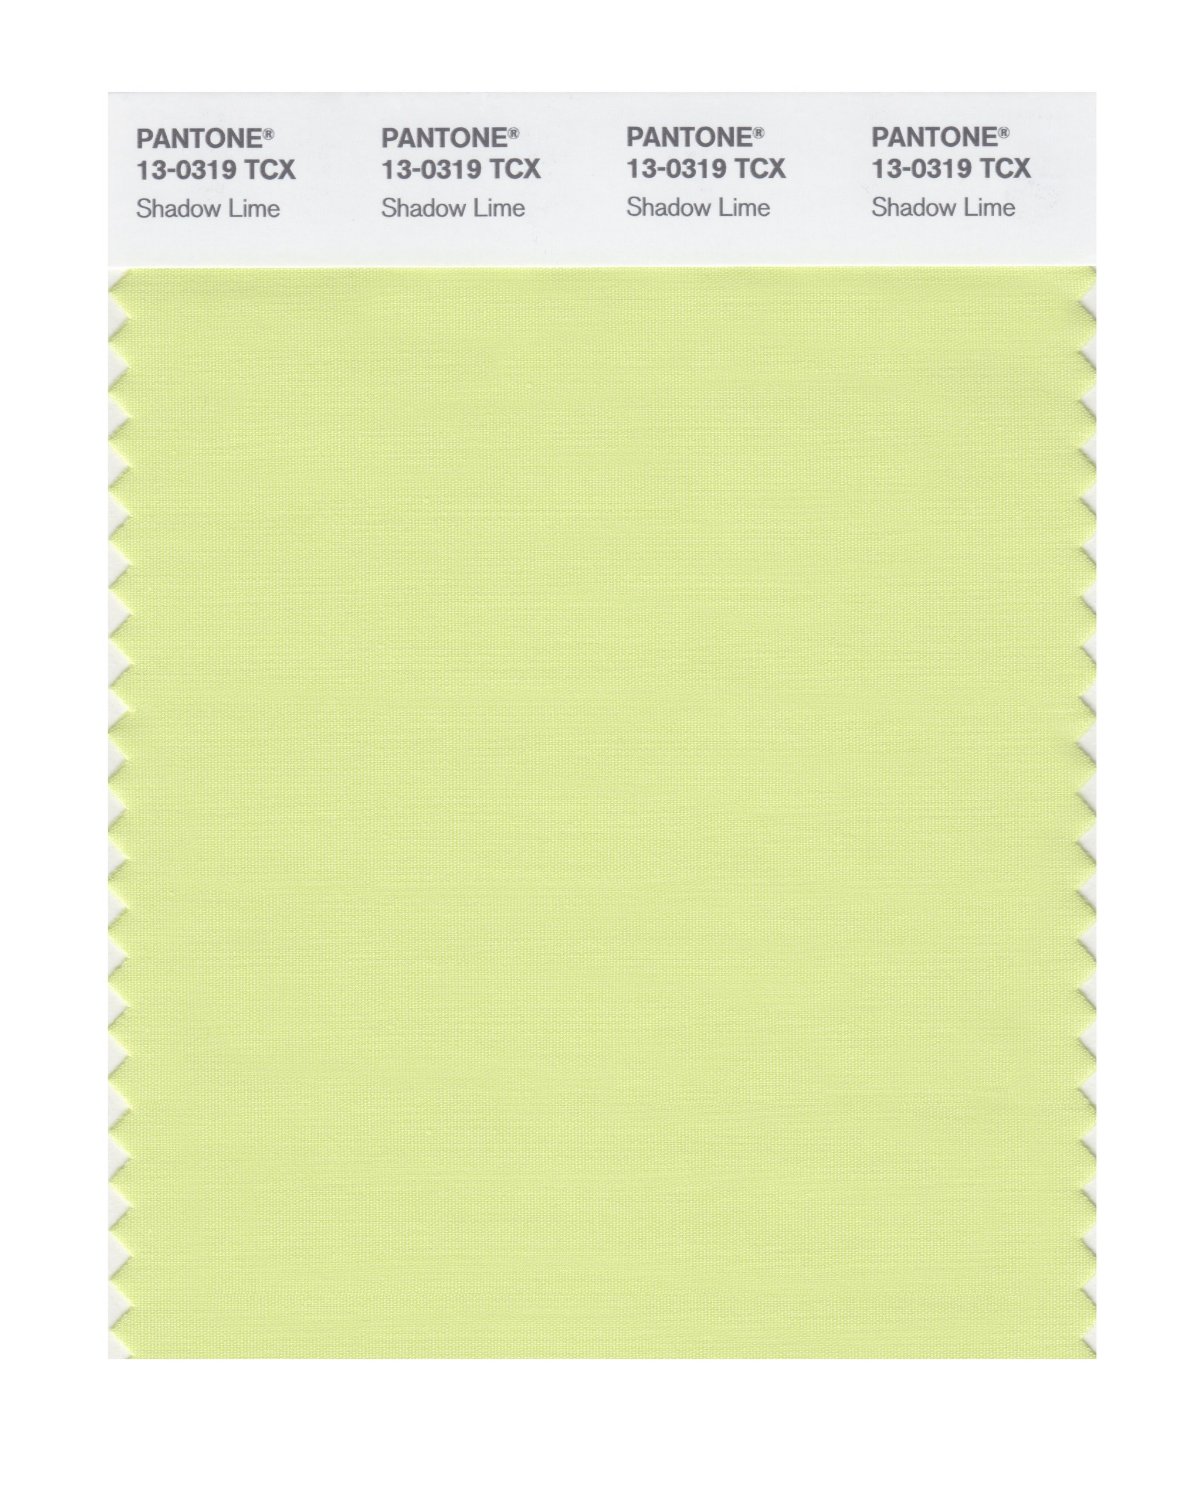 Pantone Cotton Swatch 13-0319 Shadow Lime